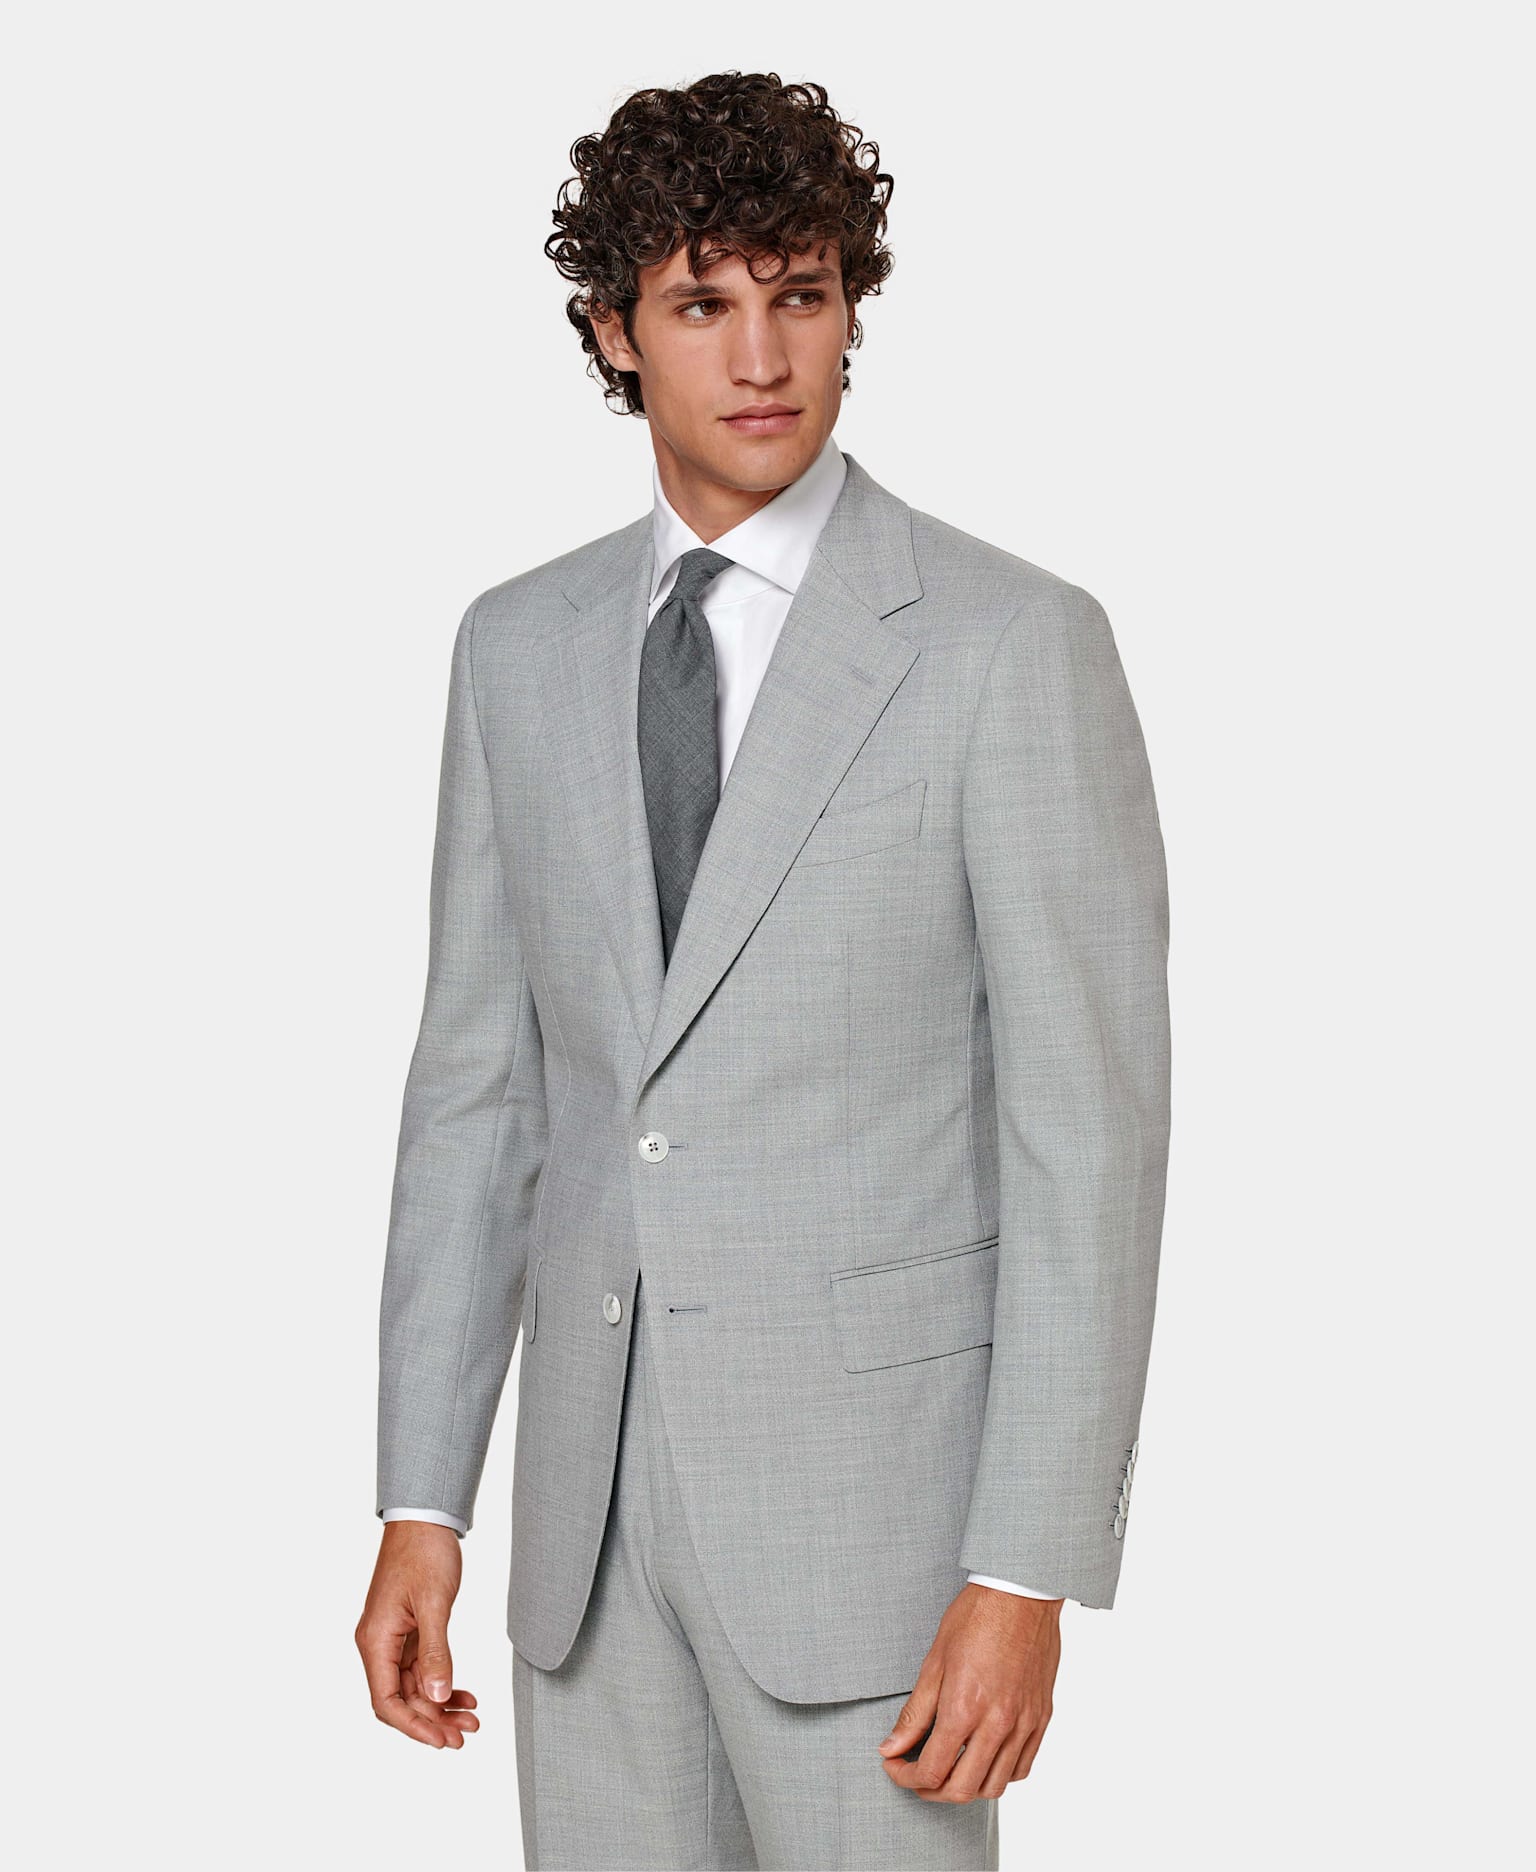 Grey suit with flap pockets and notch lapel, worn with white shirt and grey tie.